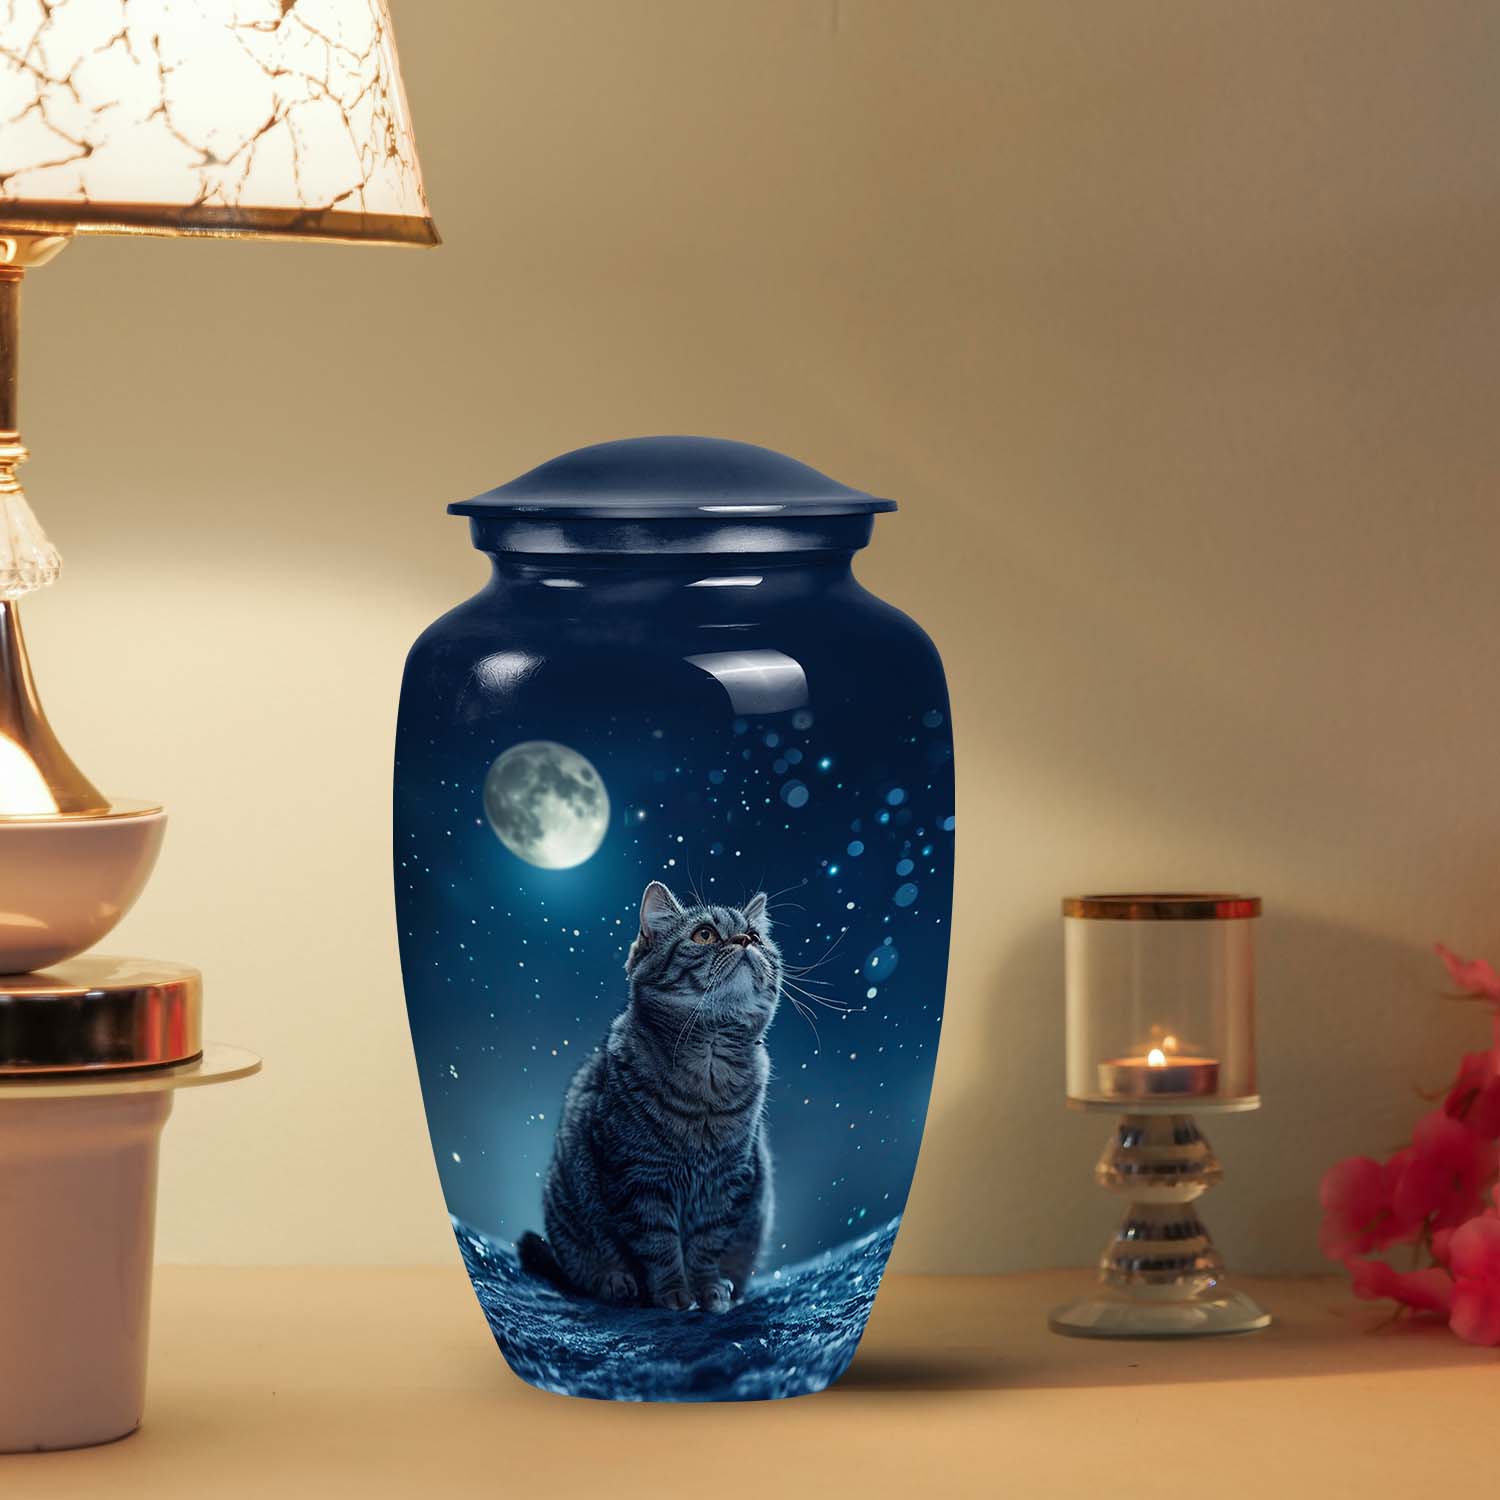 Large Cat Urn with a unique Moonlit Cat Design, a perfect Memorial Urn for loved pets